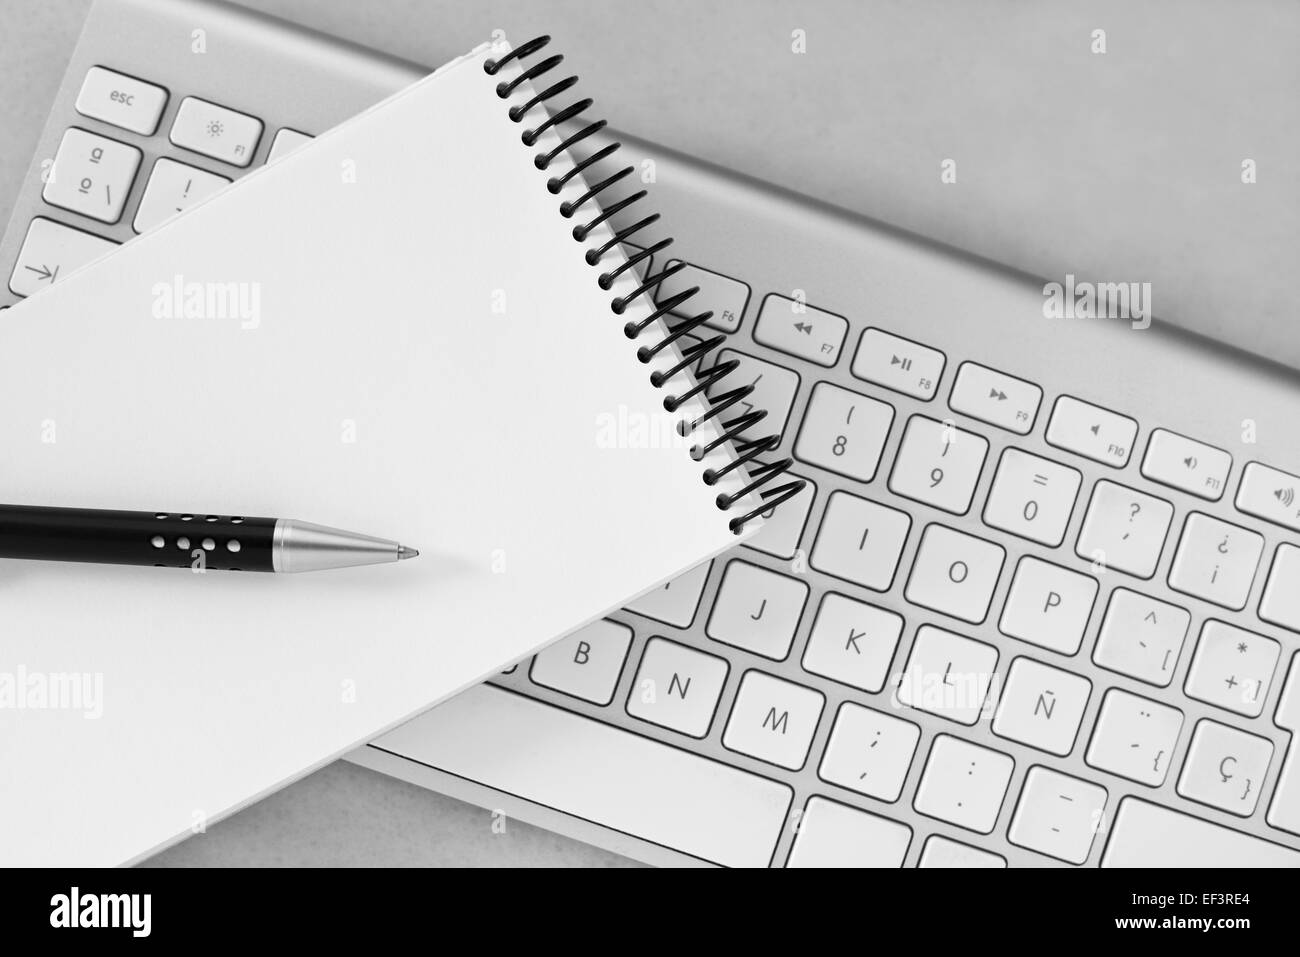 Notebook, pen and computer keyboard background Stock Photo